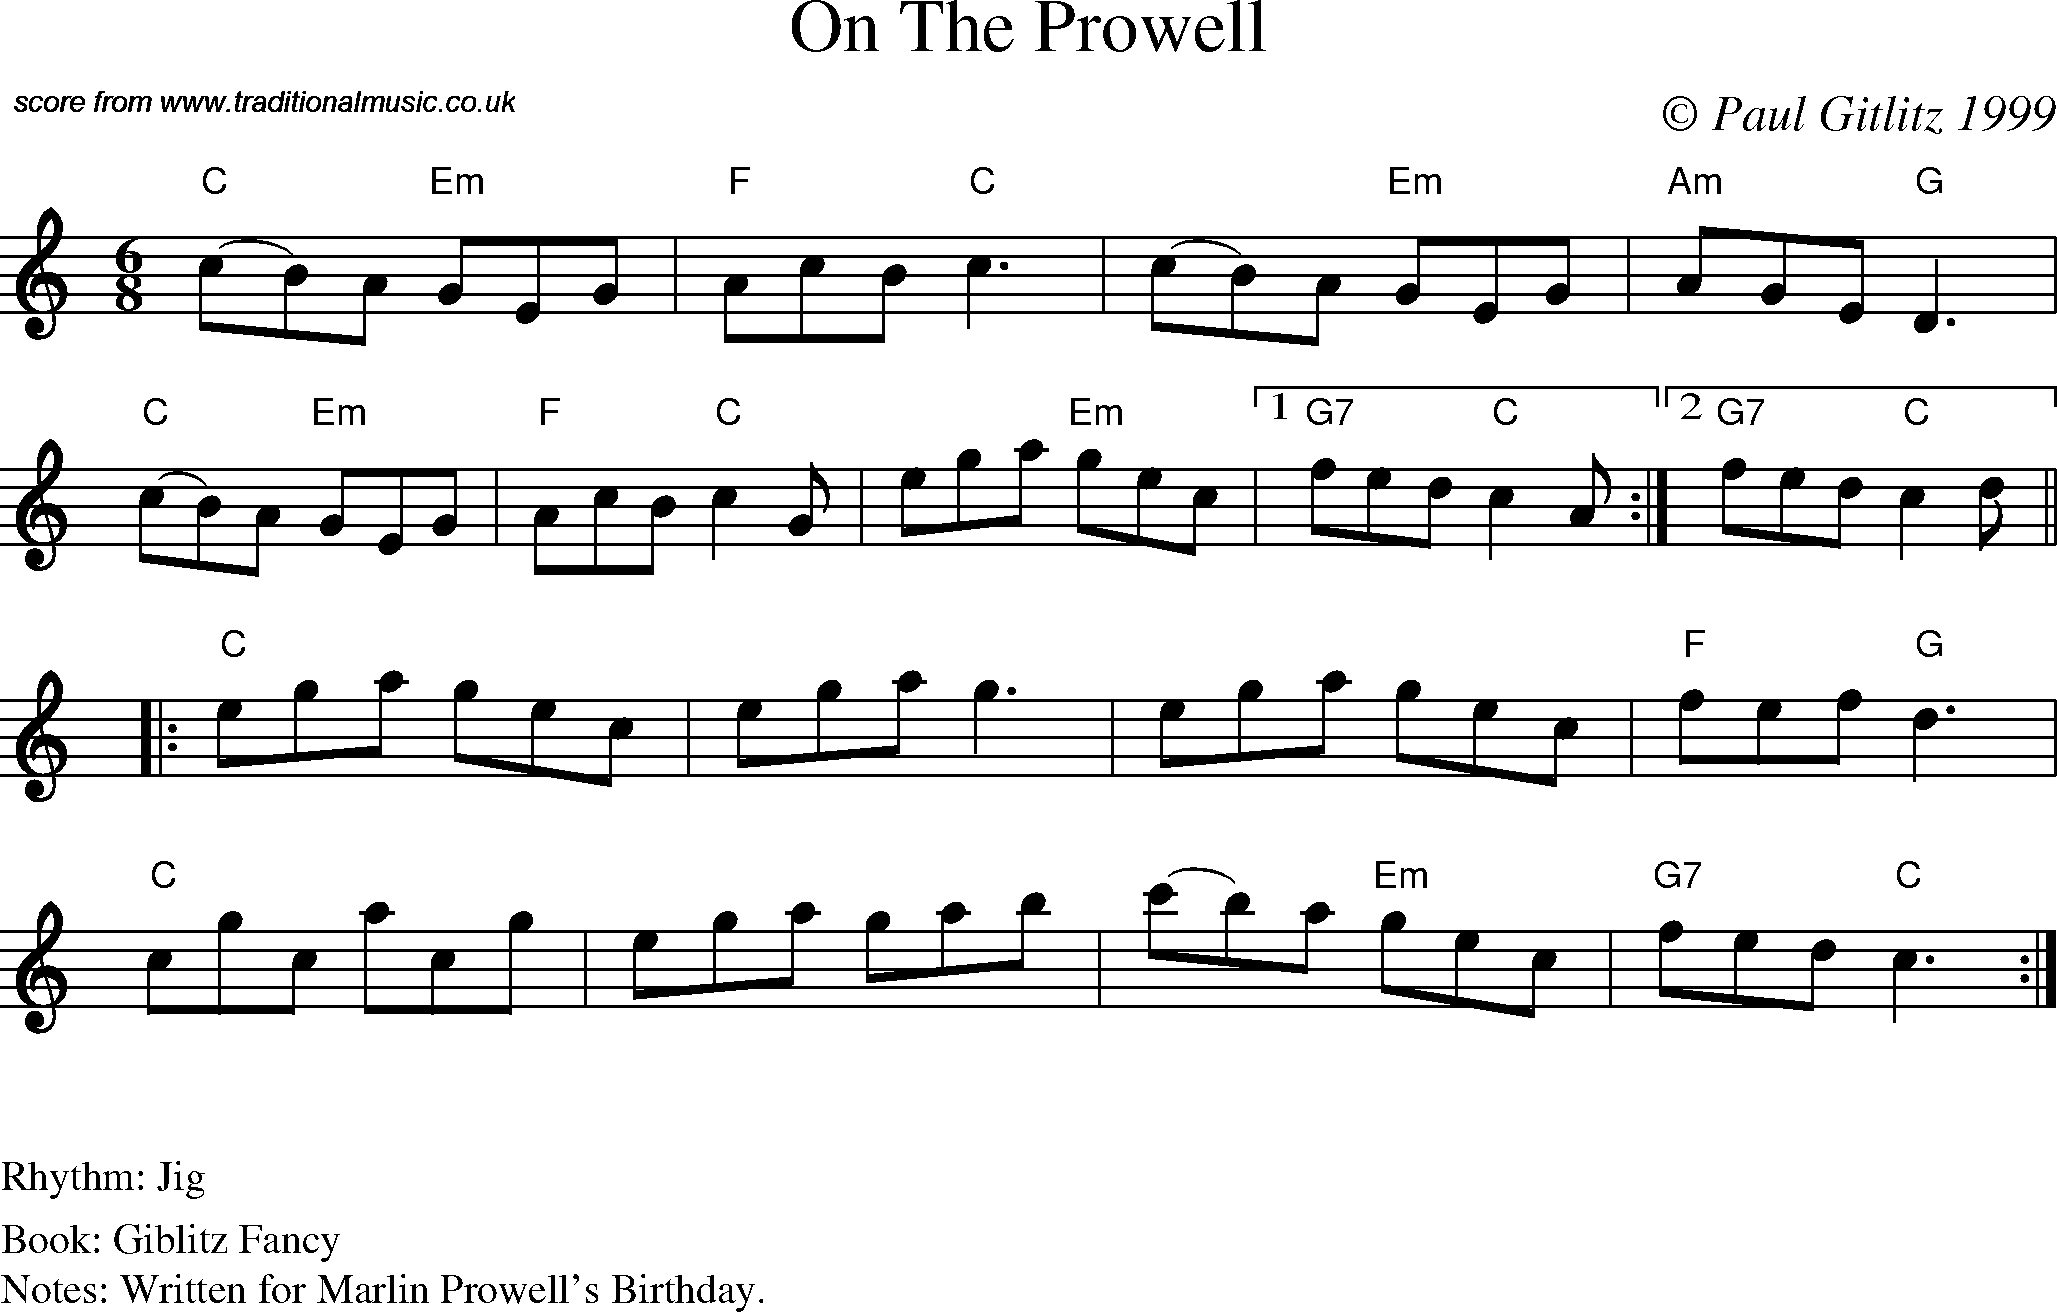 Sheet Music Score for Jig - On The Prowell